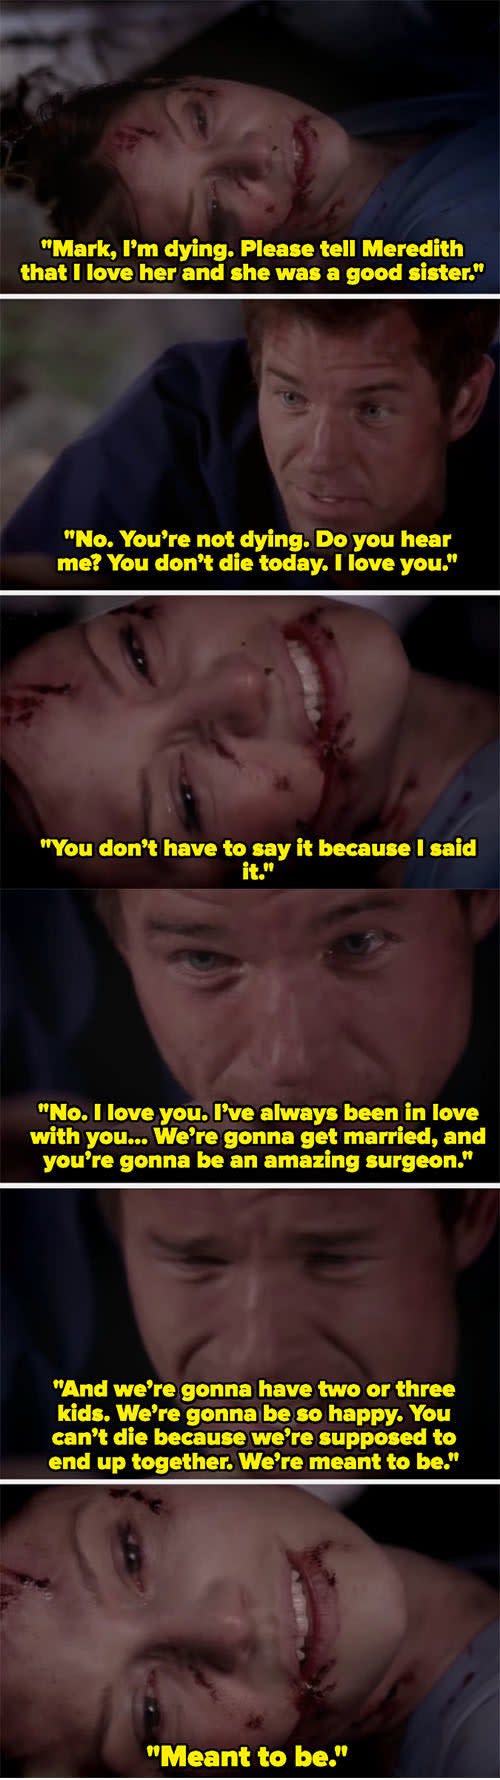 Lexie saying her final goodbye to Mark before she dies on "Grey's Anatomy"